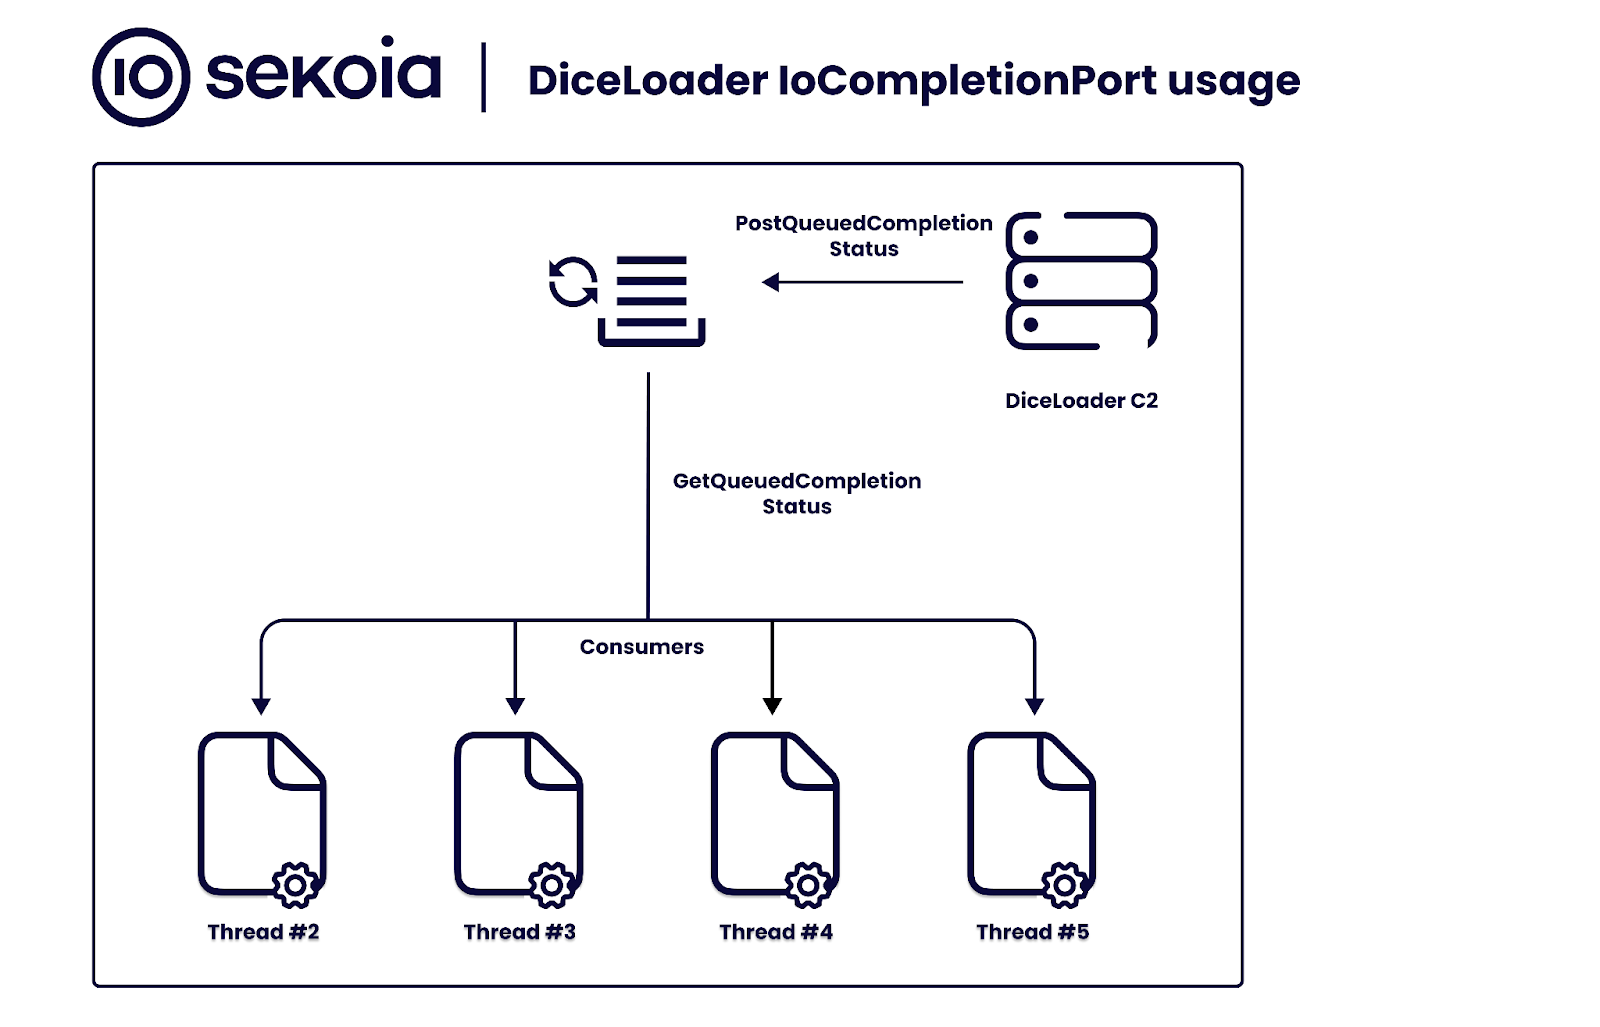 Usage of IoCompletionPort (queue) in DiceLoader execution. Source: Sekoia.io